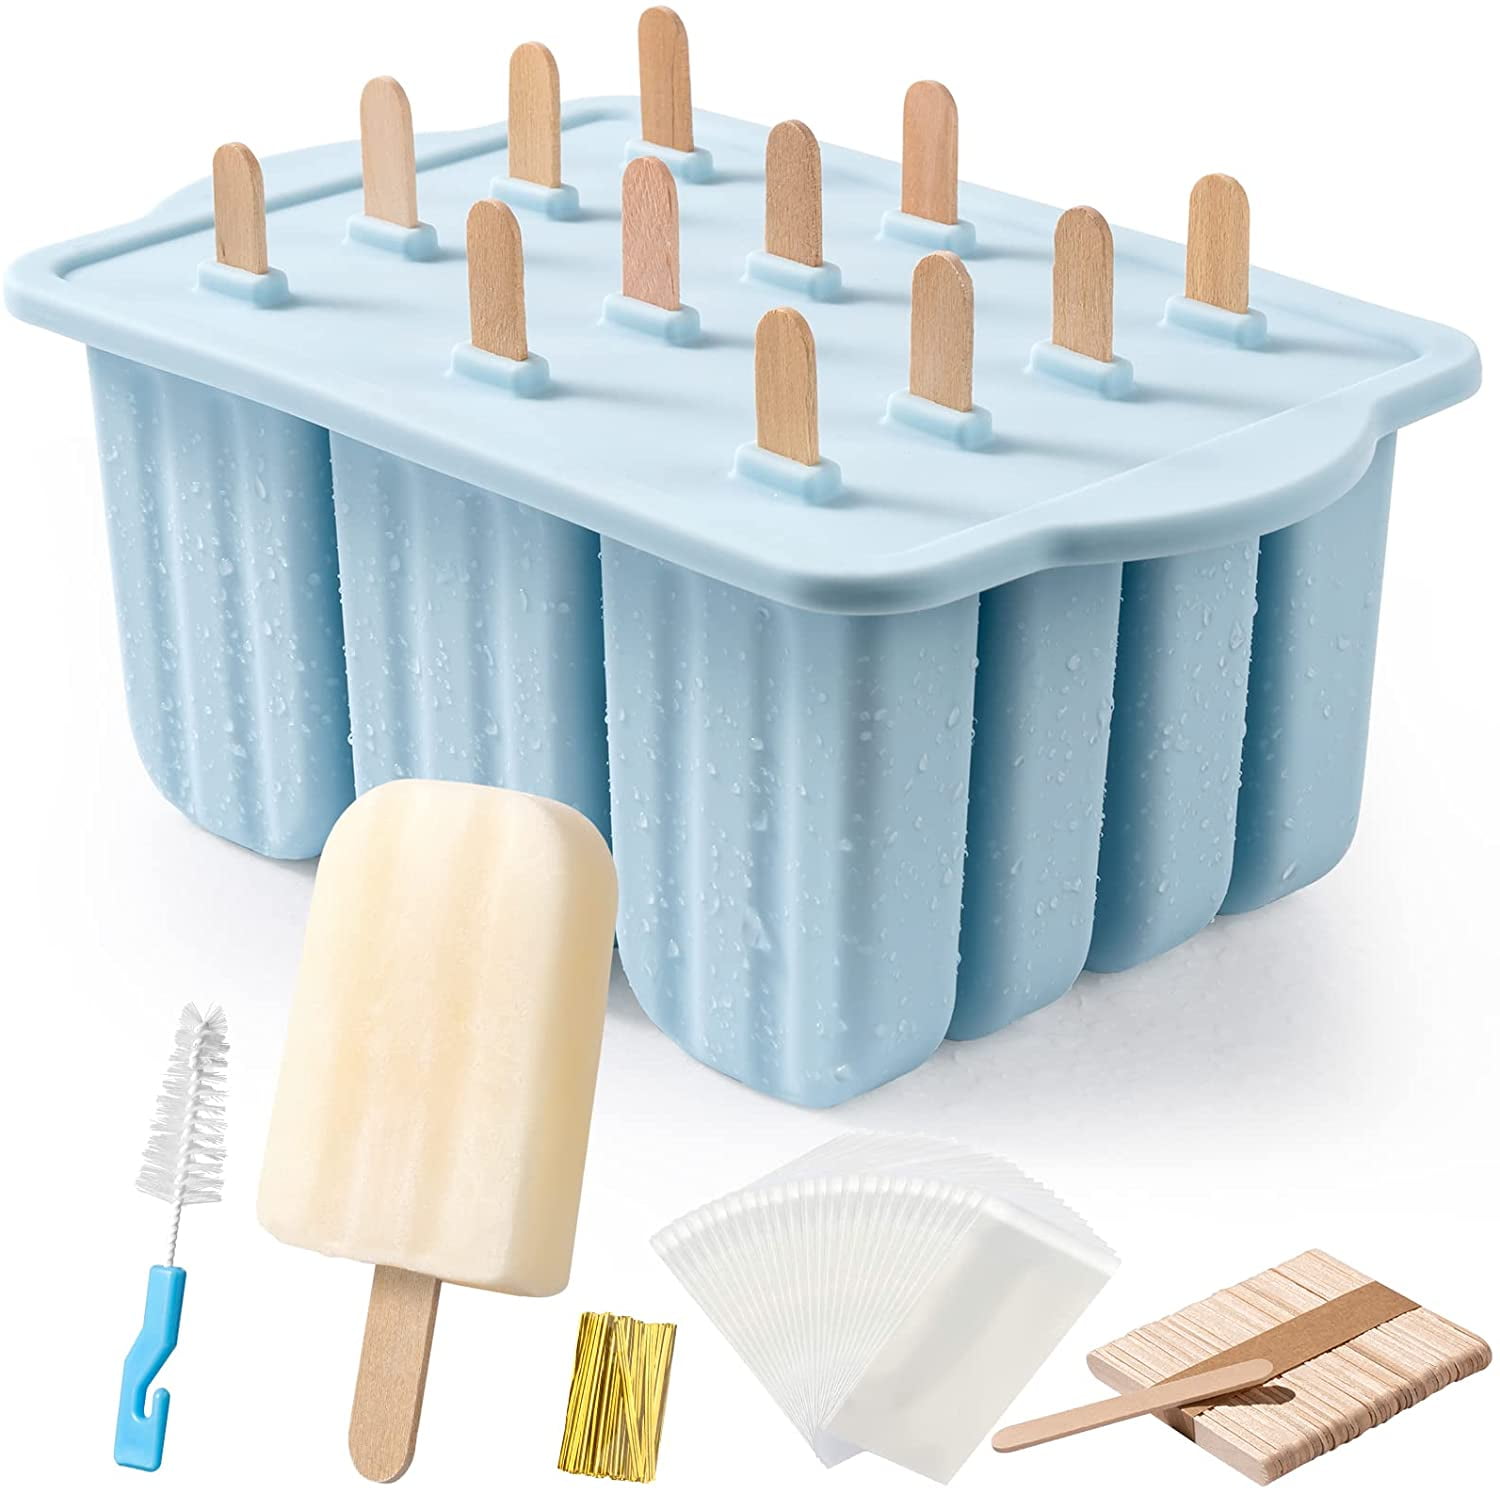 Popsicle Molds Set, LONGRV 12 Pieces Silicone Popsicle Molds Easy-Release  BPA-free Popsicle Maker Molds Ice Pop Molds Homemade Popsicle Ice Pop Maker  with 50PCS Popsicle Sticks+Cleaning Brush 